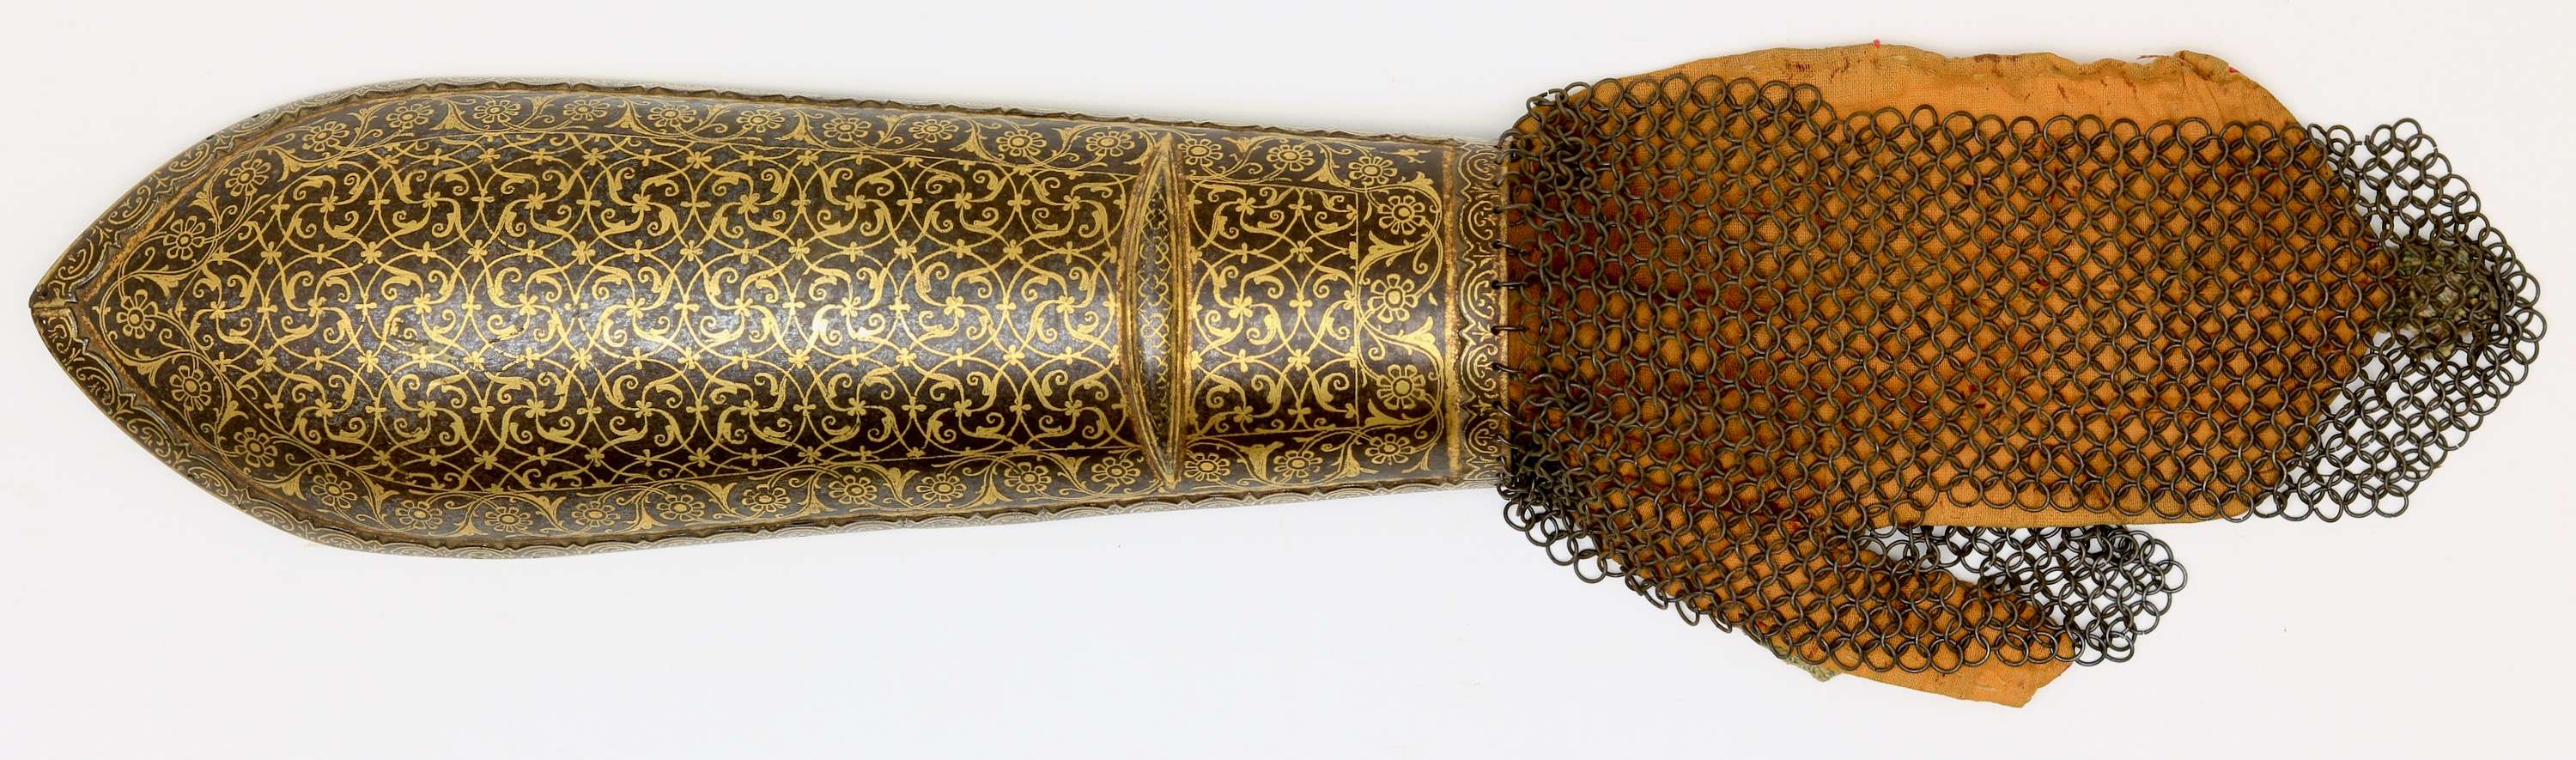 Indian arm guard from Punjab called bazuband or dastane